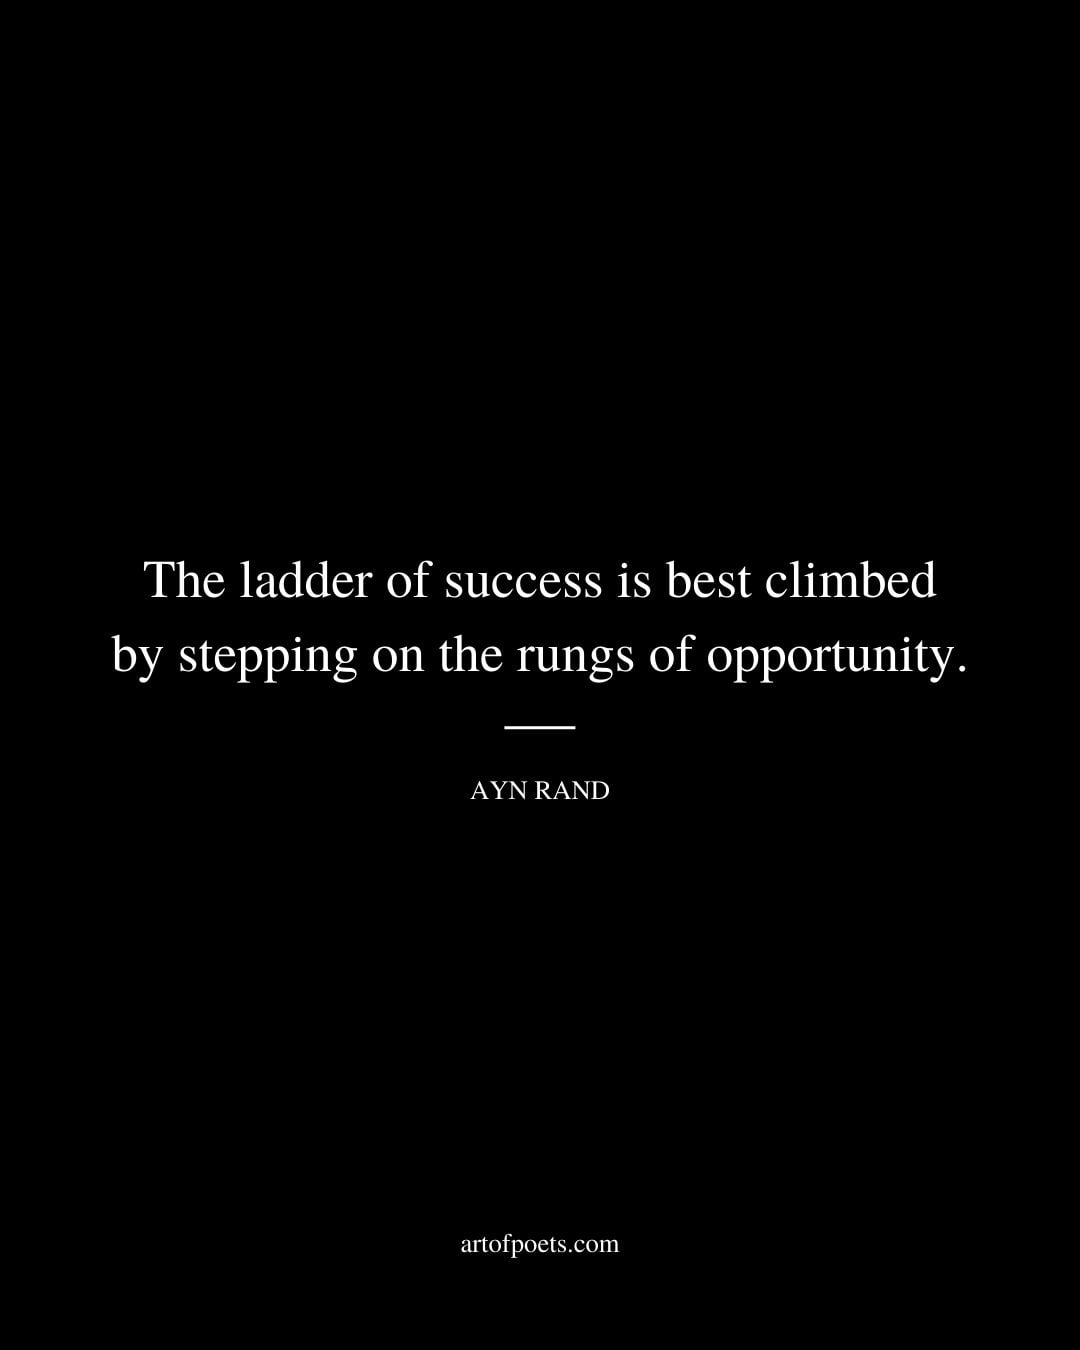 The ladder of success is best climbed by stepping on the rungs of opportunity